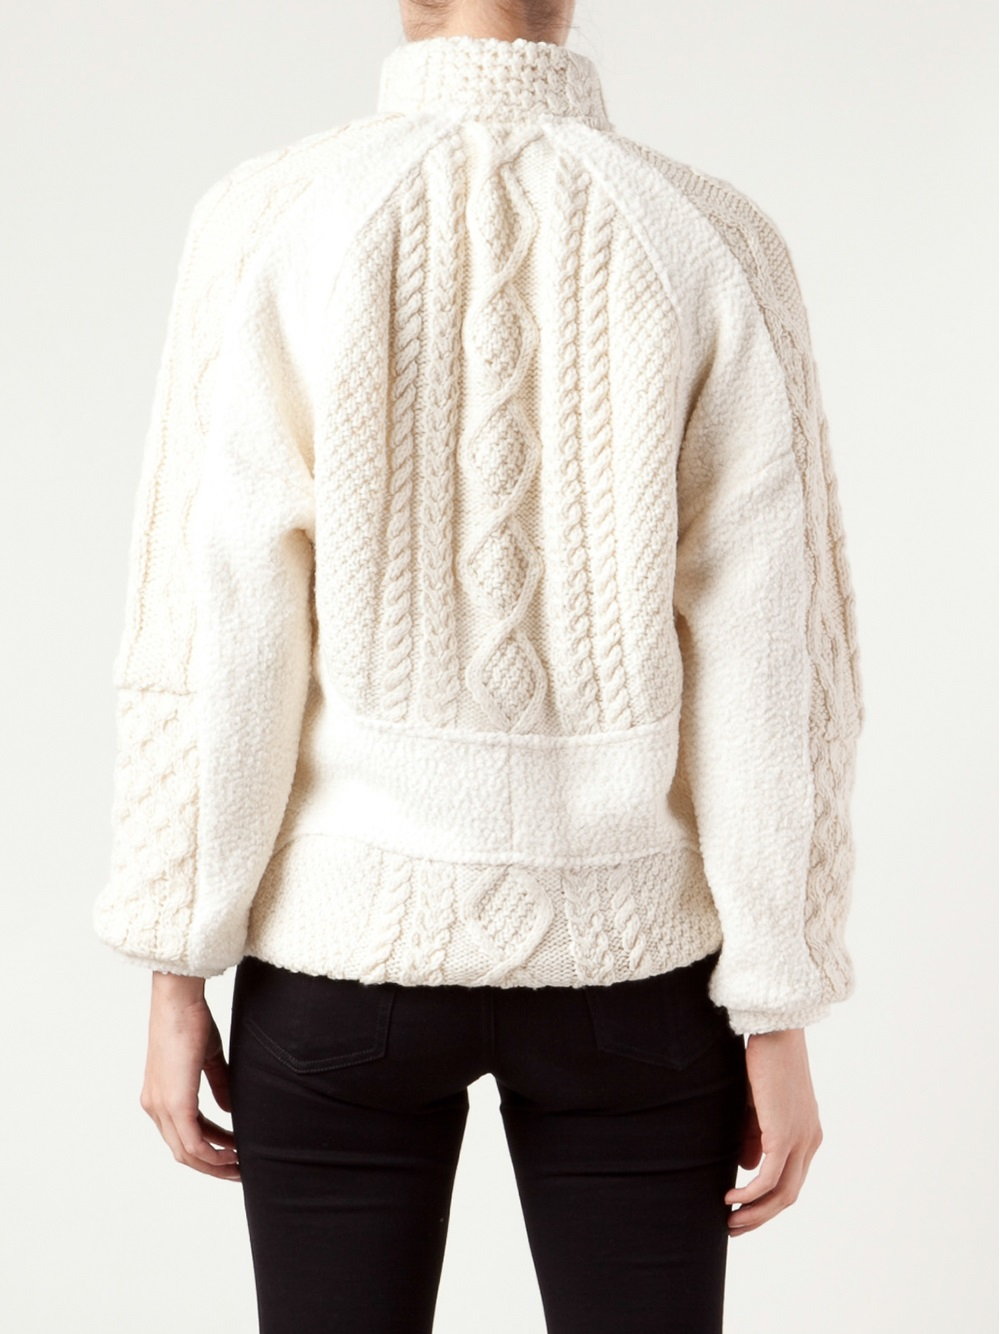 Goodone Cable Knit Design Cardigan in White | Lyst